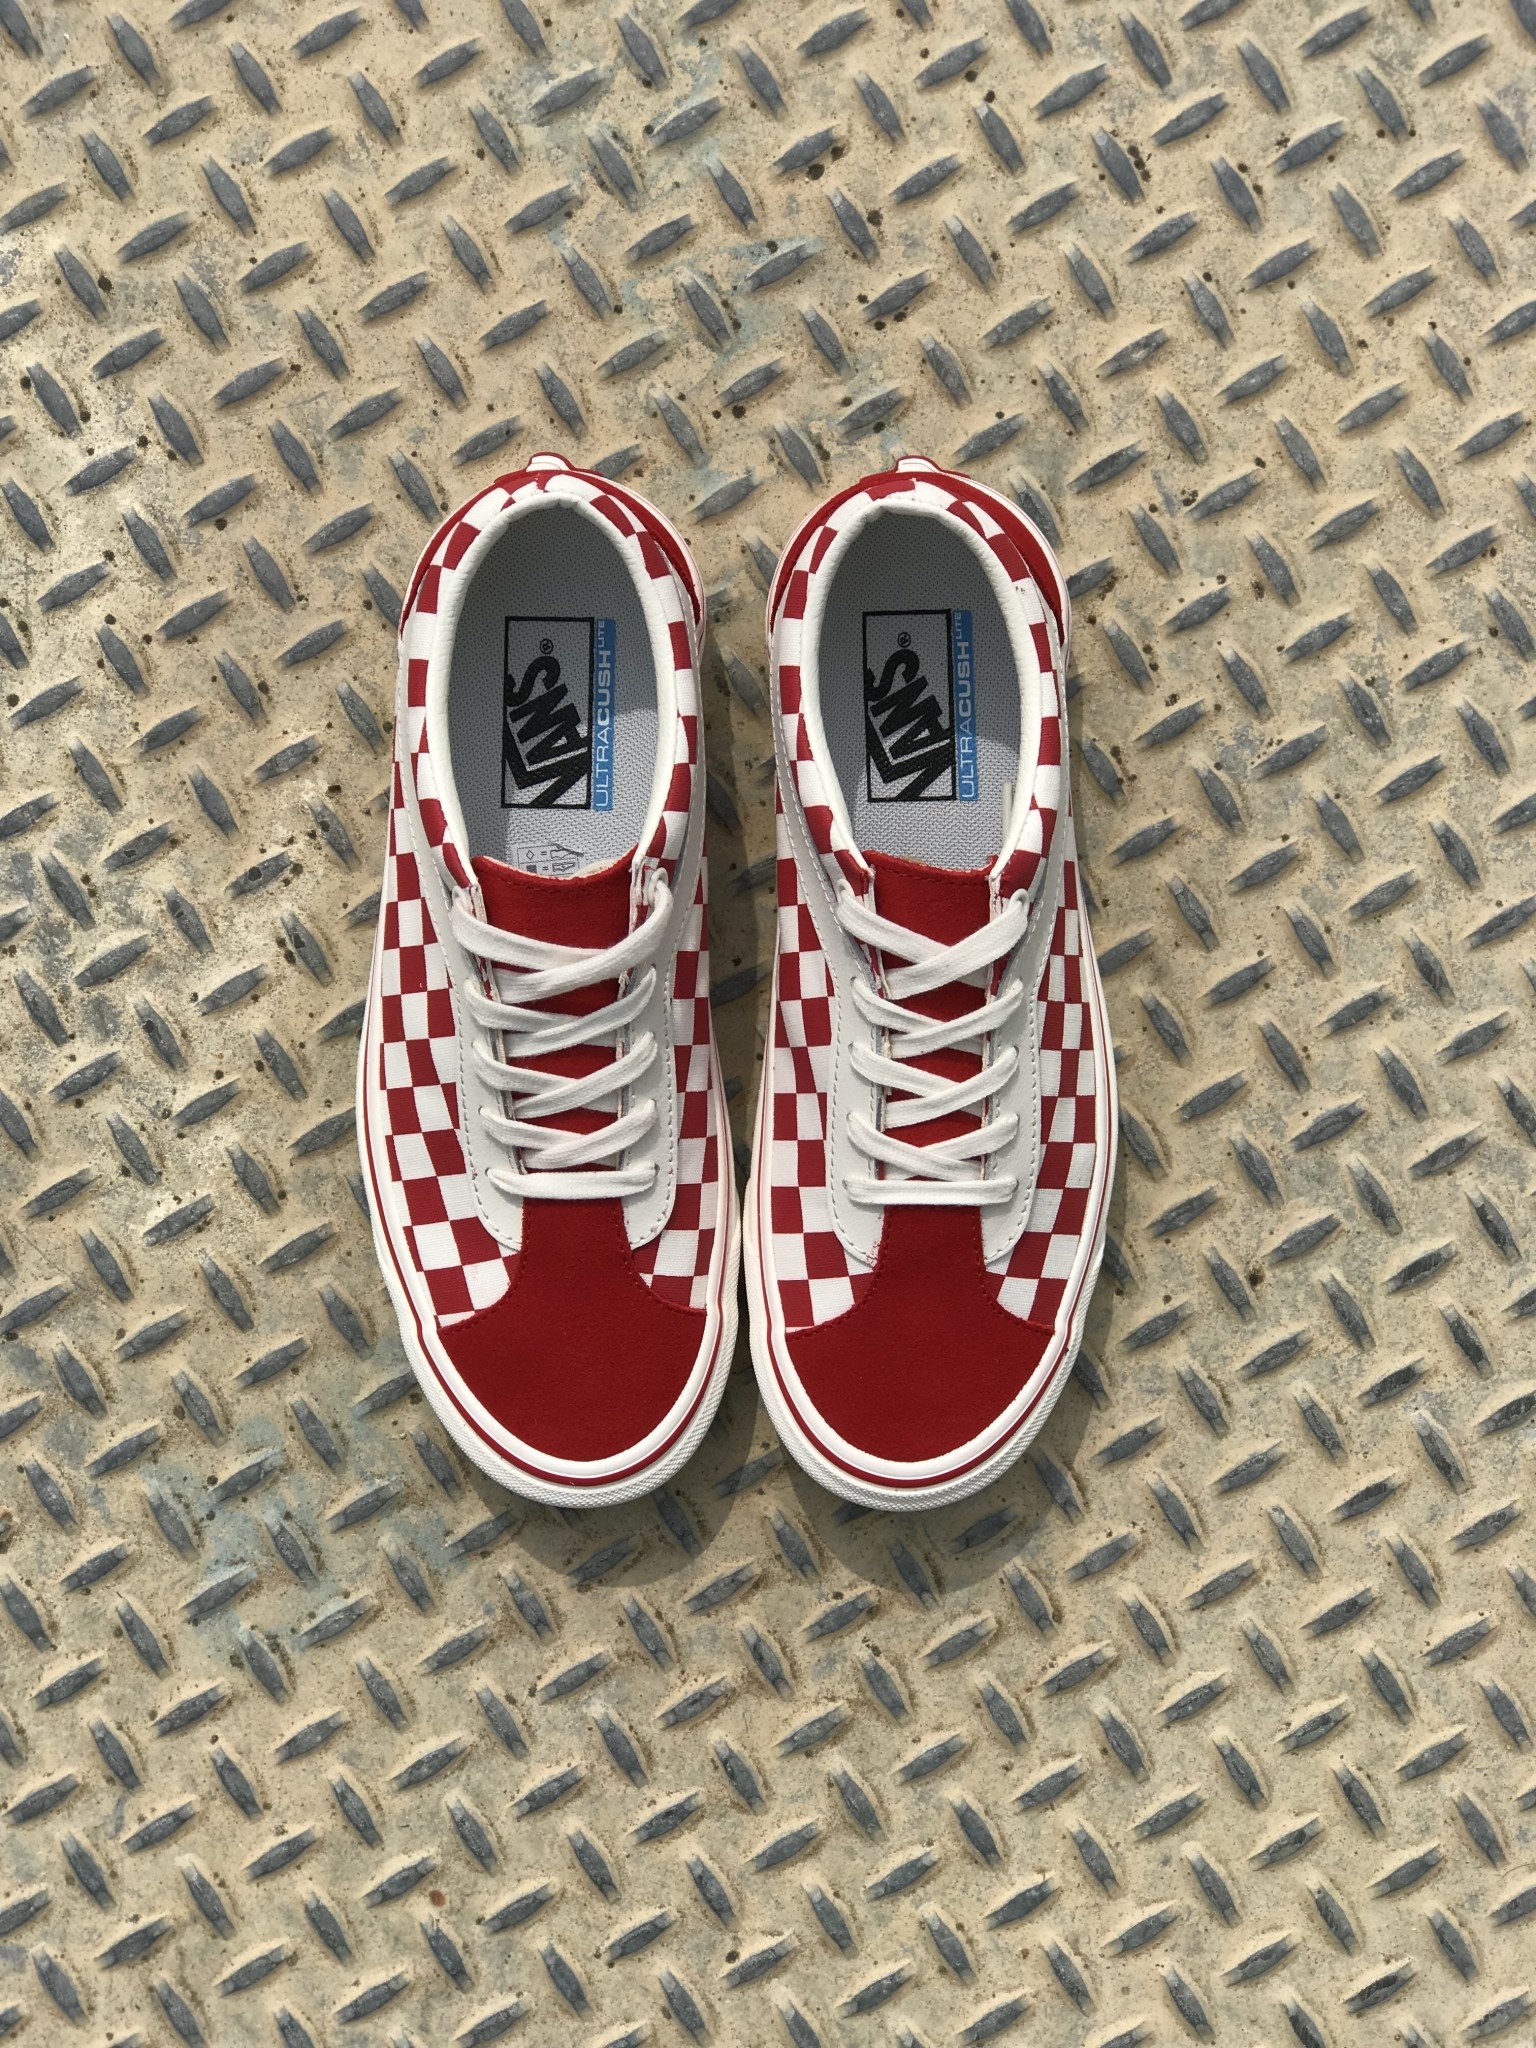 red checkered vans on feet